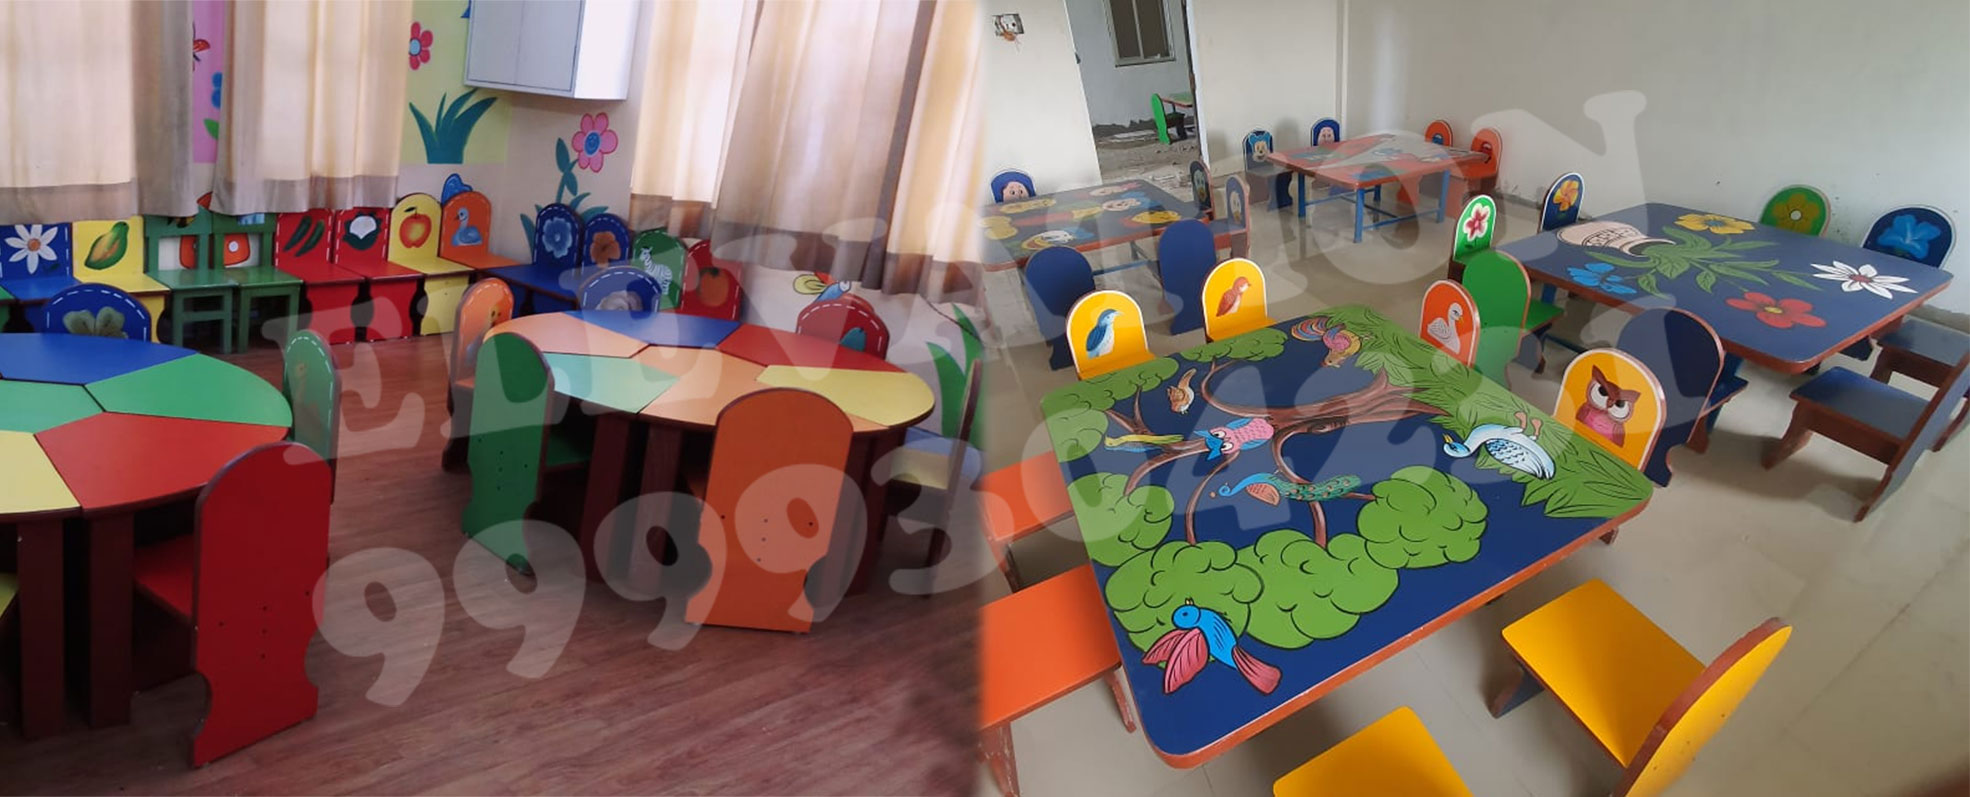 Play School Furniture in Lucknow